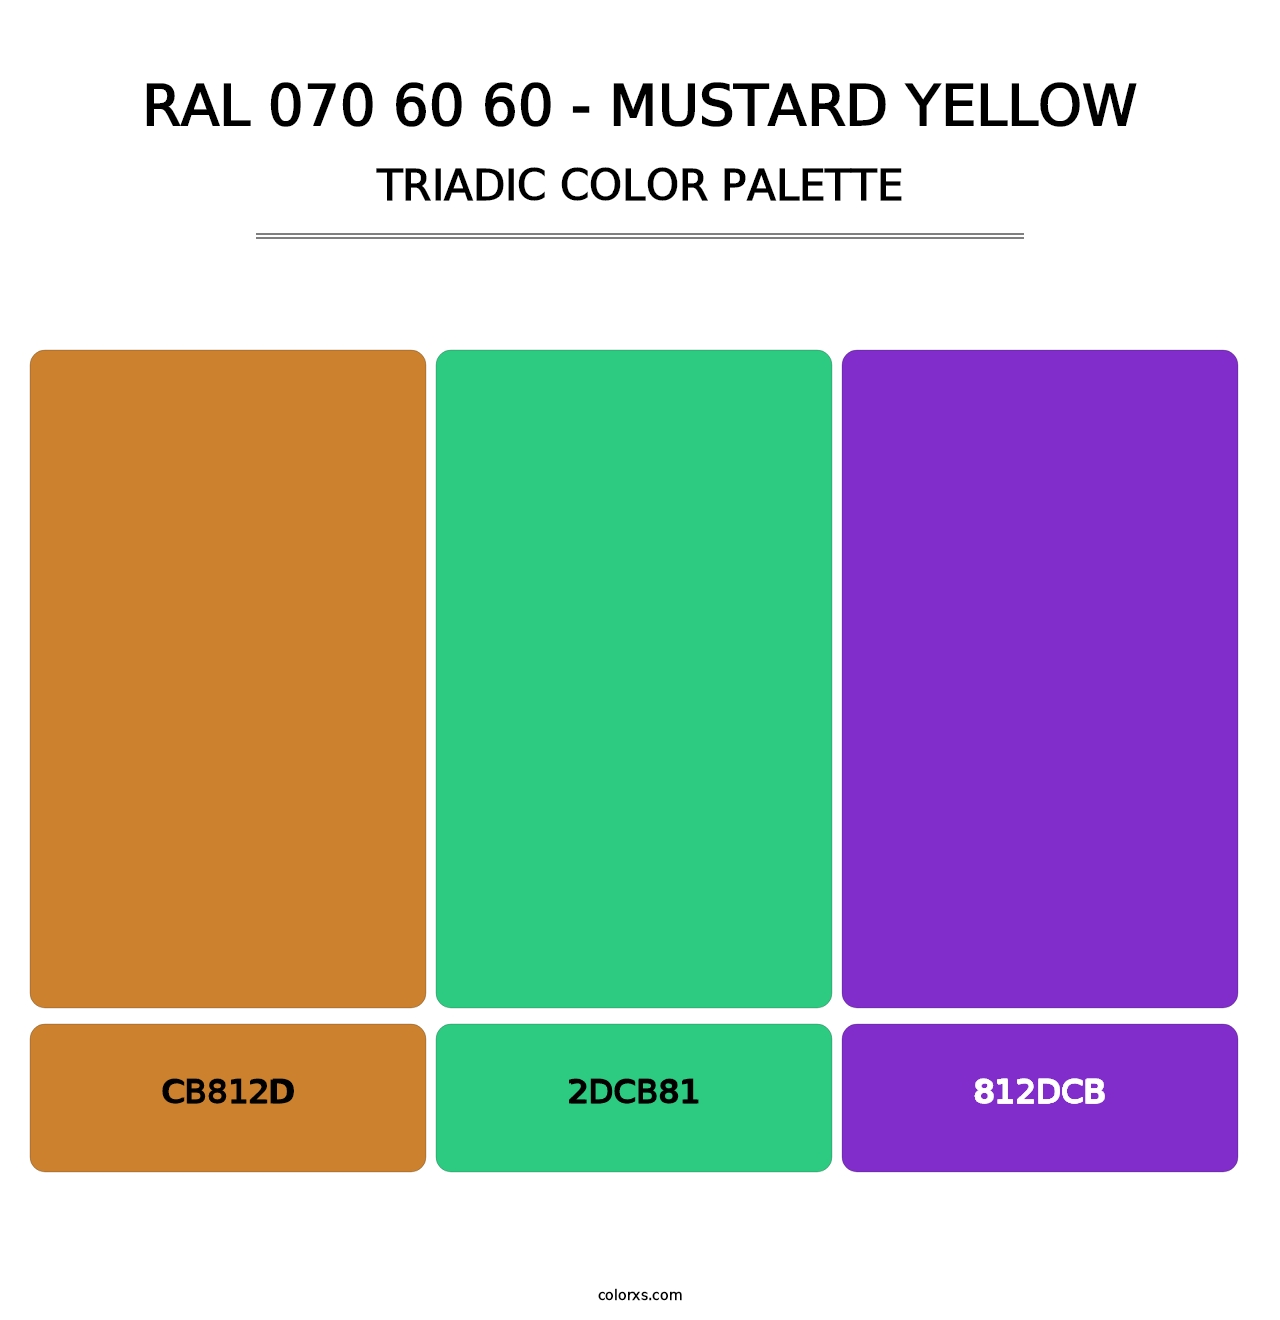 RAL 070 60 60 - Mustard Yellow - Triadic Color Palette